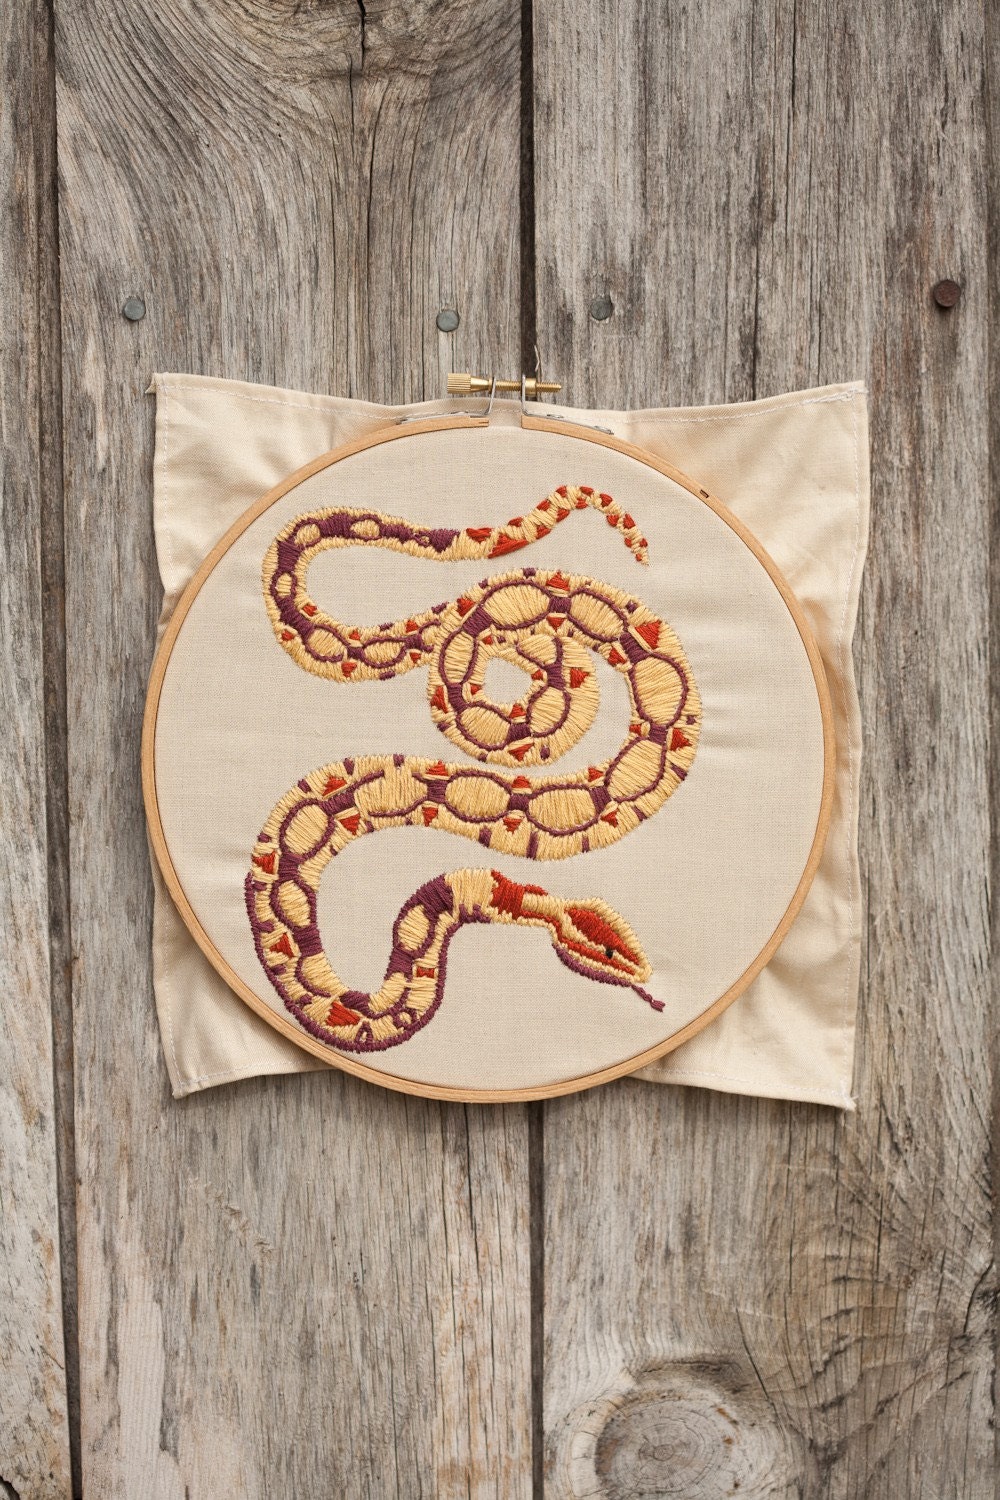 Yellow, Red and Maroon Serpent Embroidery